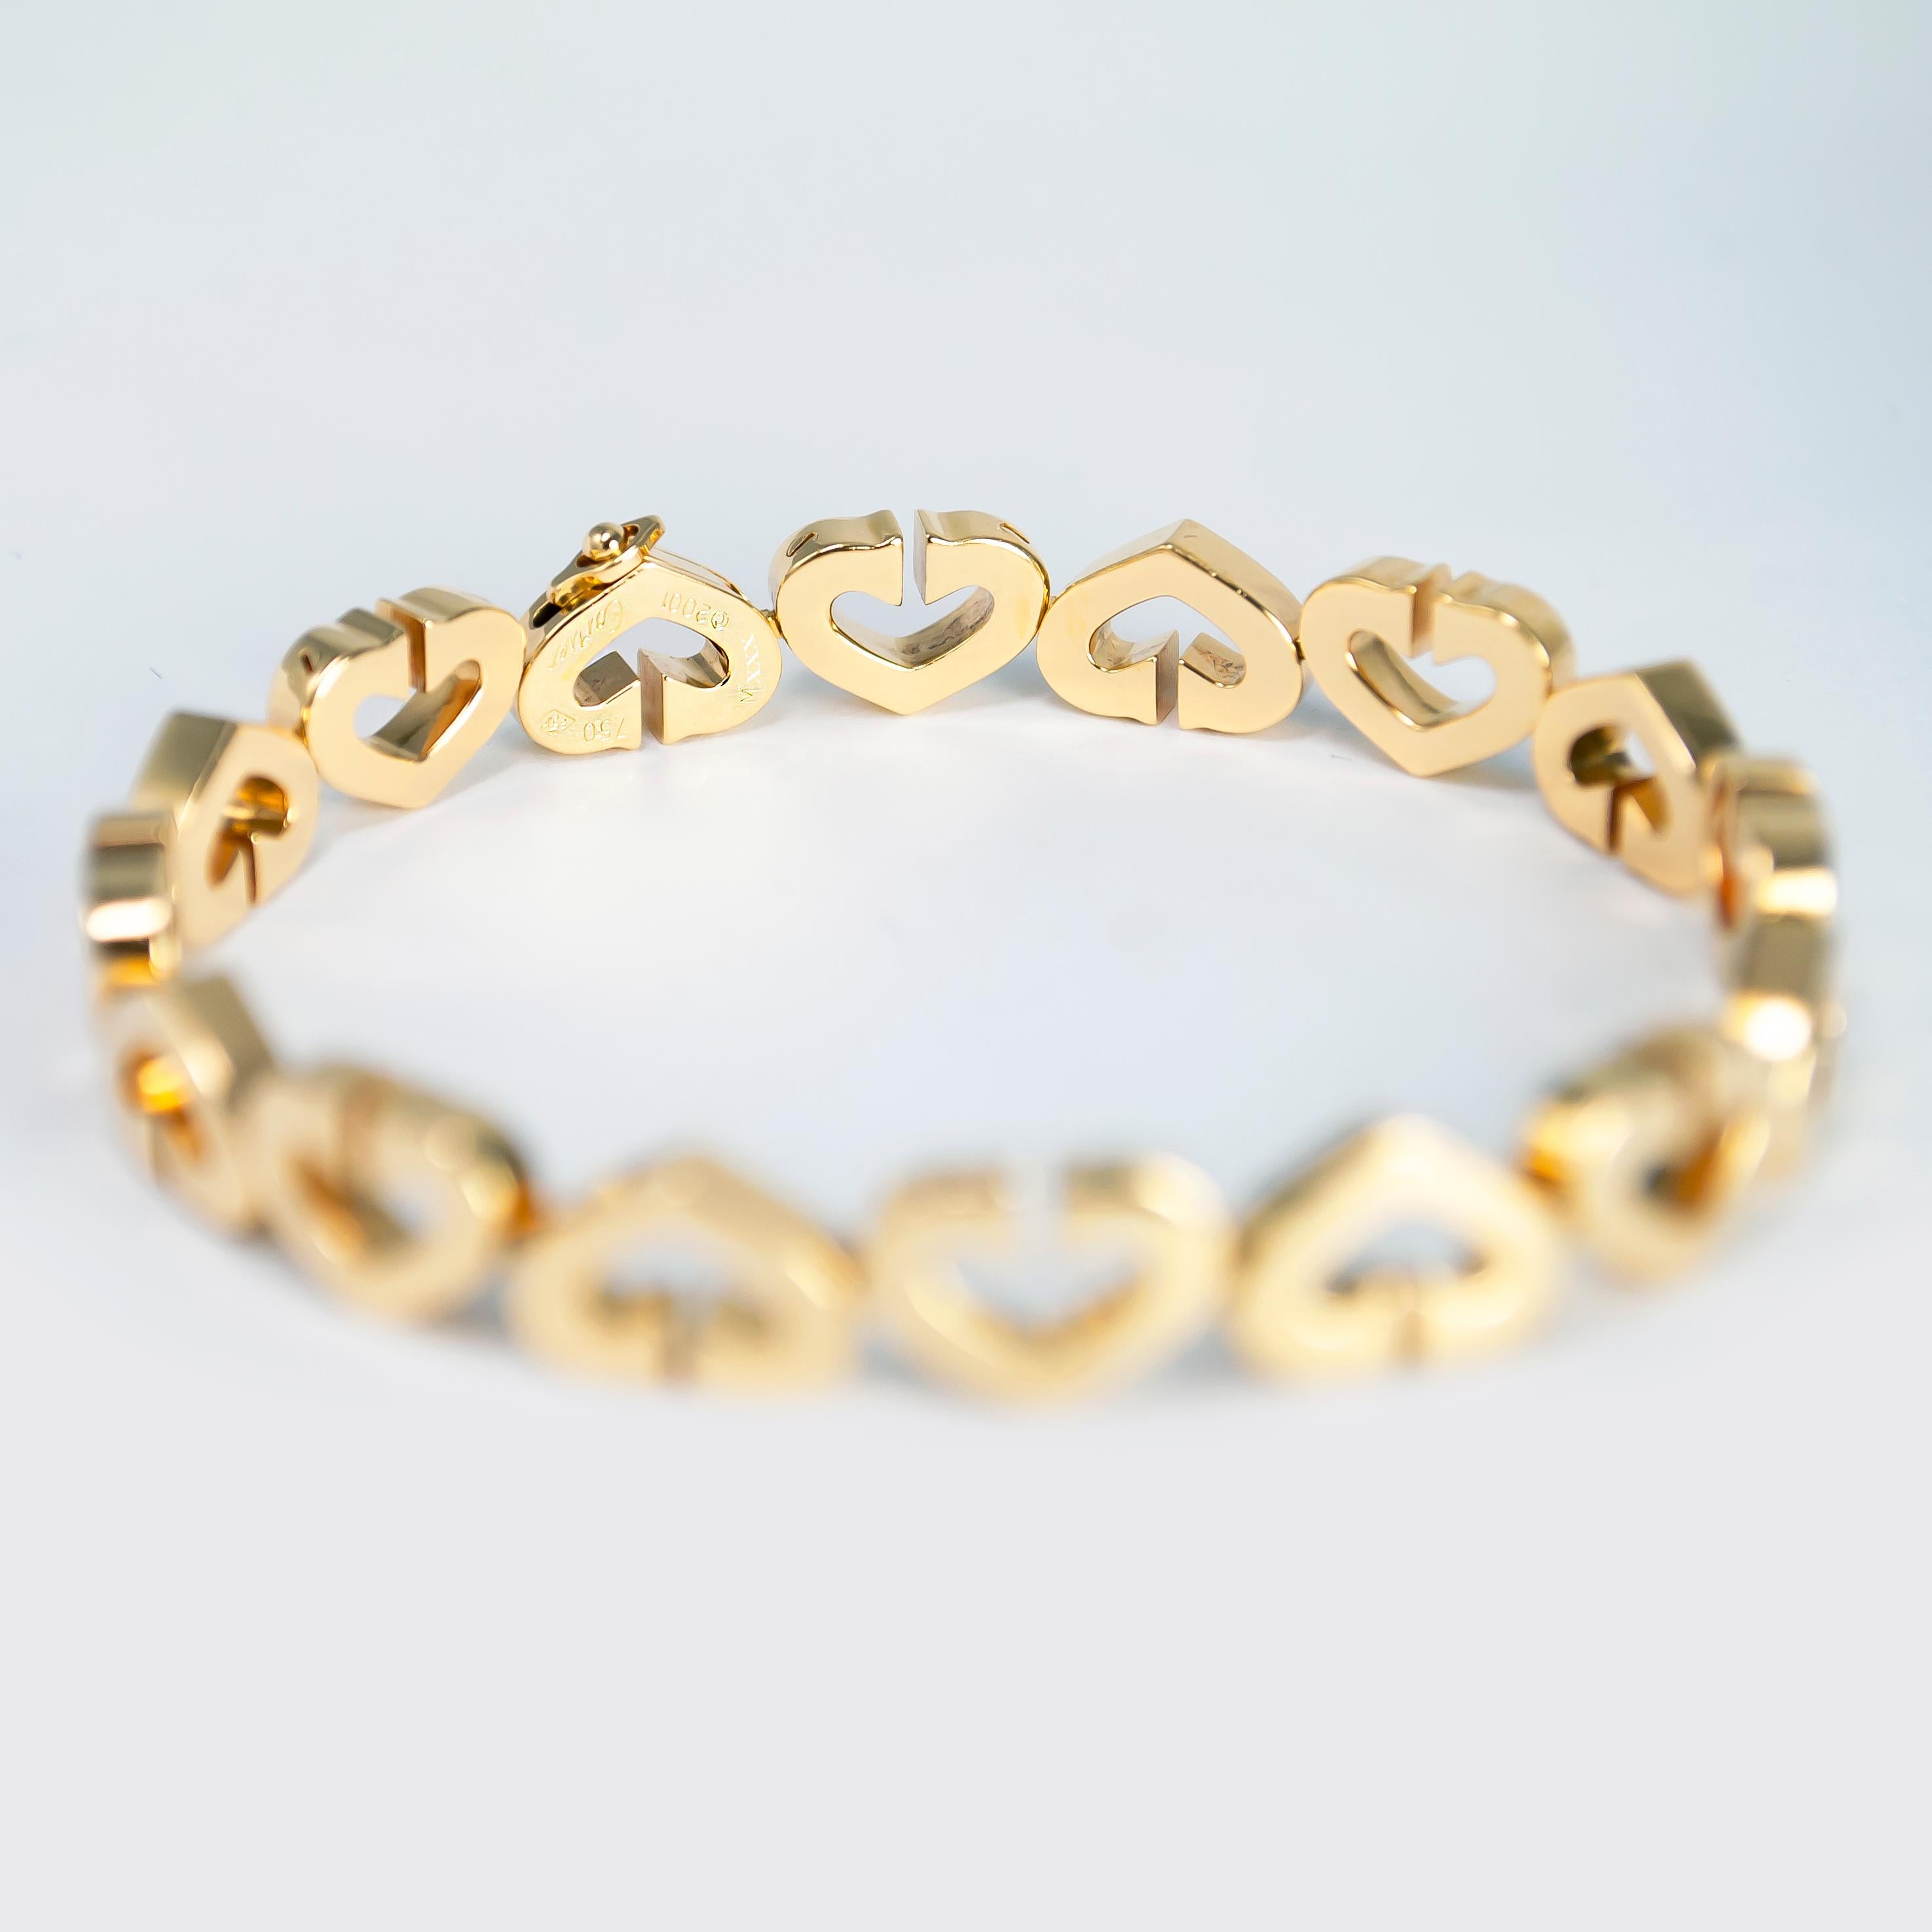 This breathtaking, signed Cartier bracelet is made of 18K yellow gold 